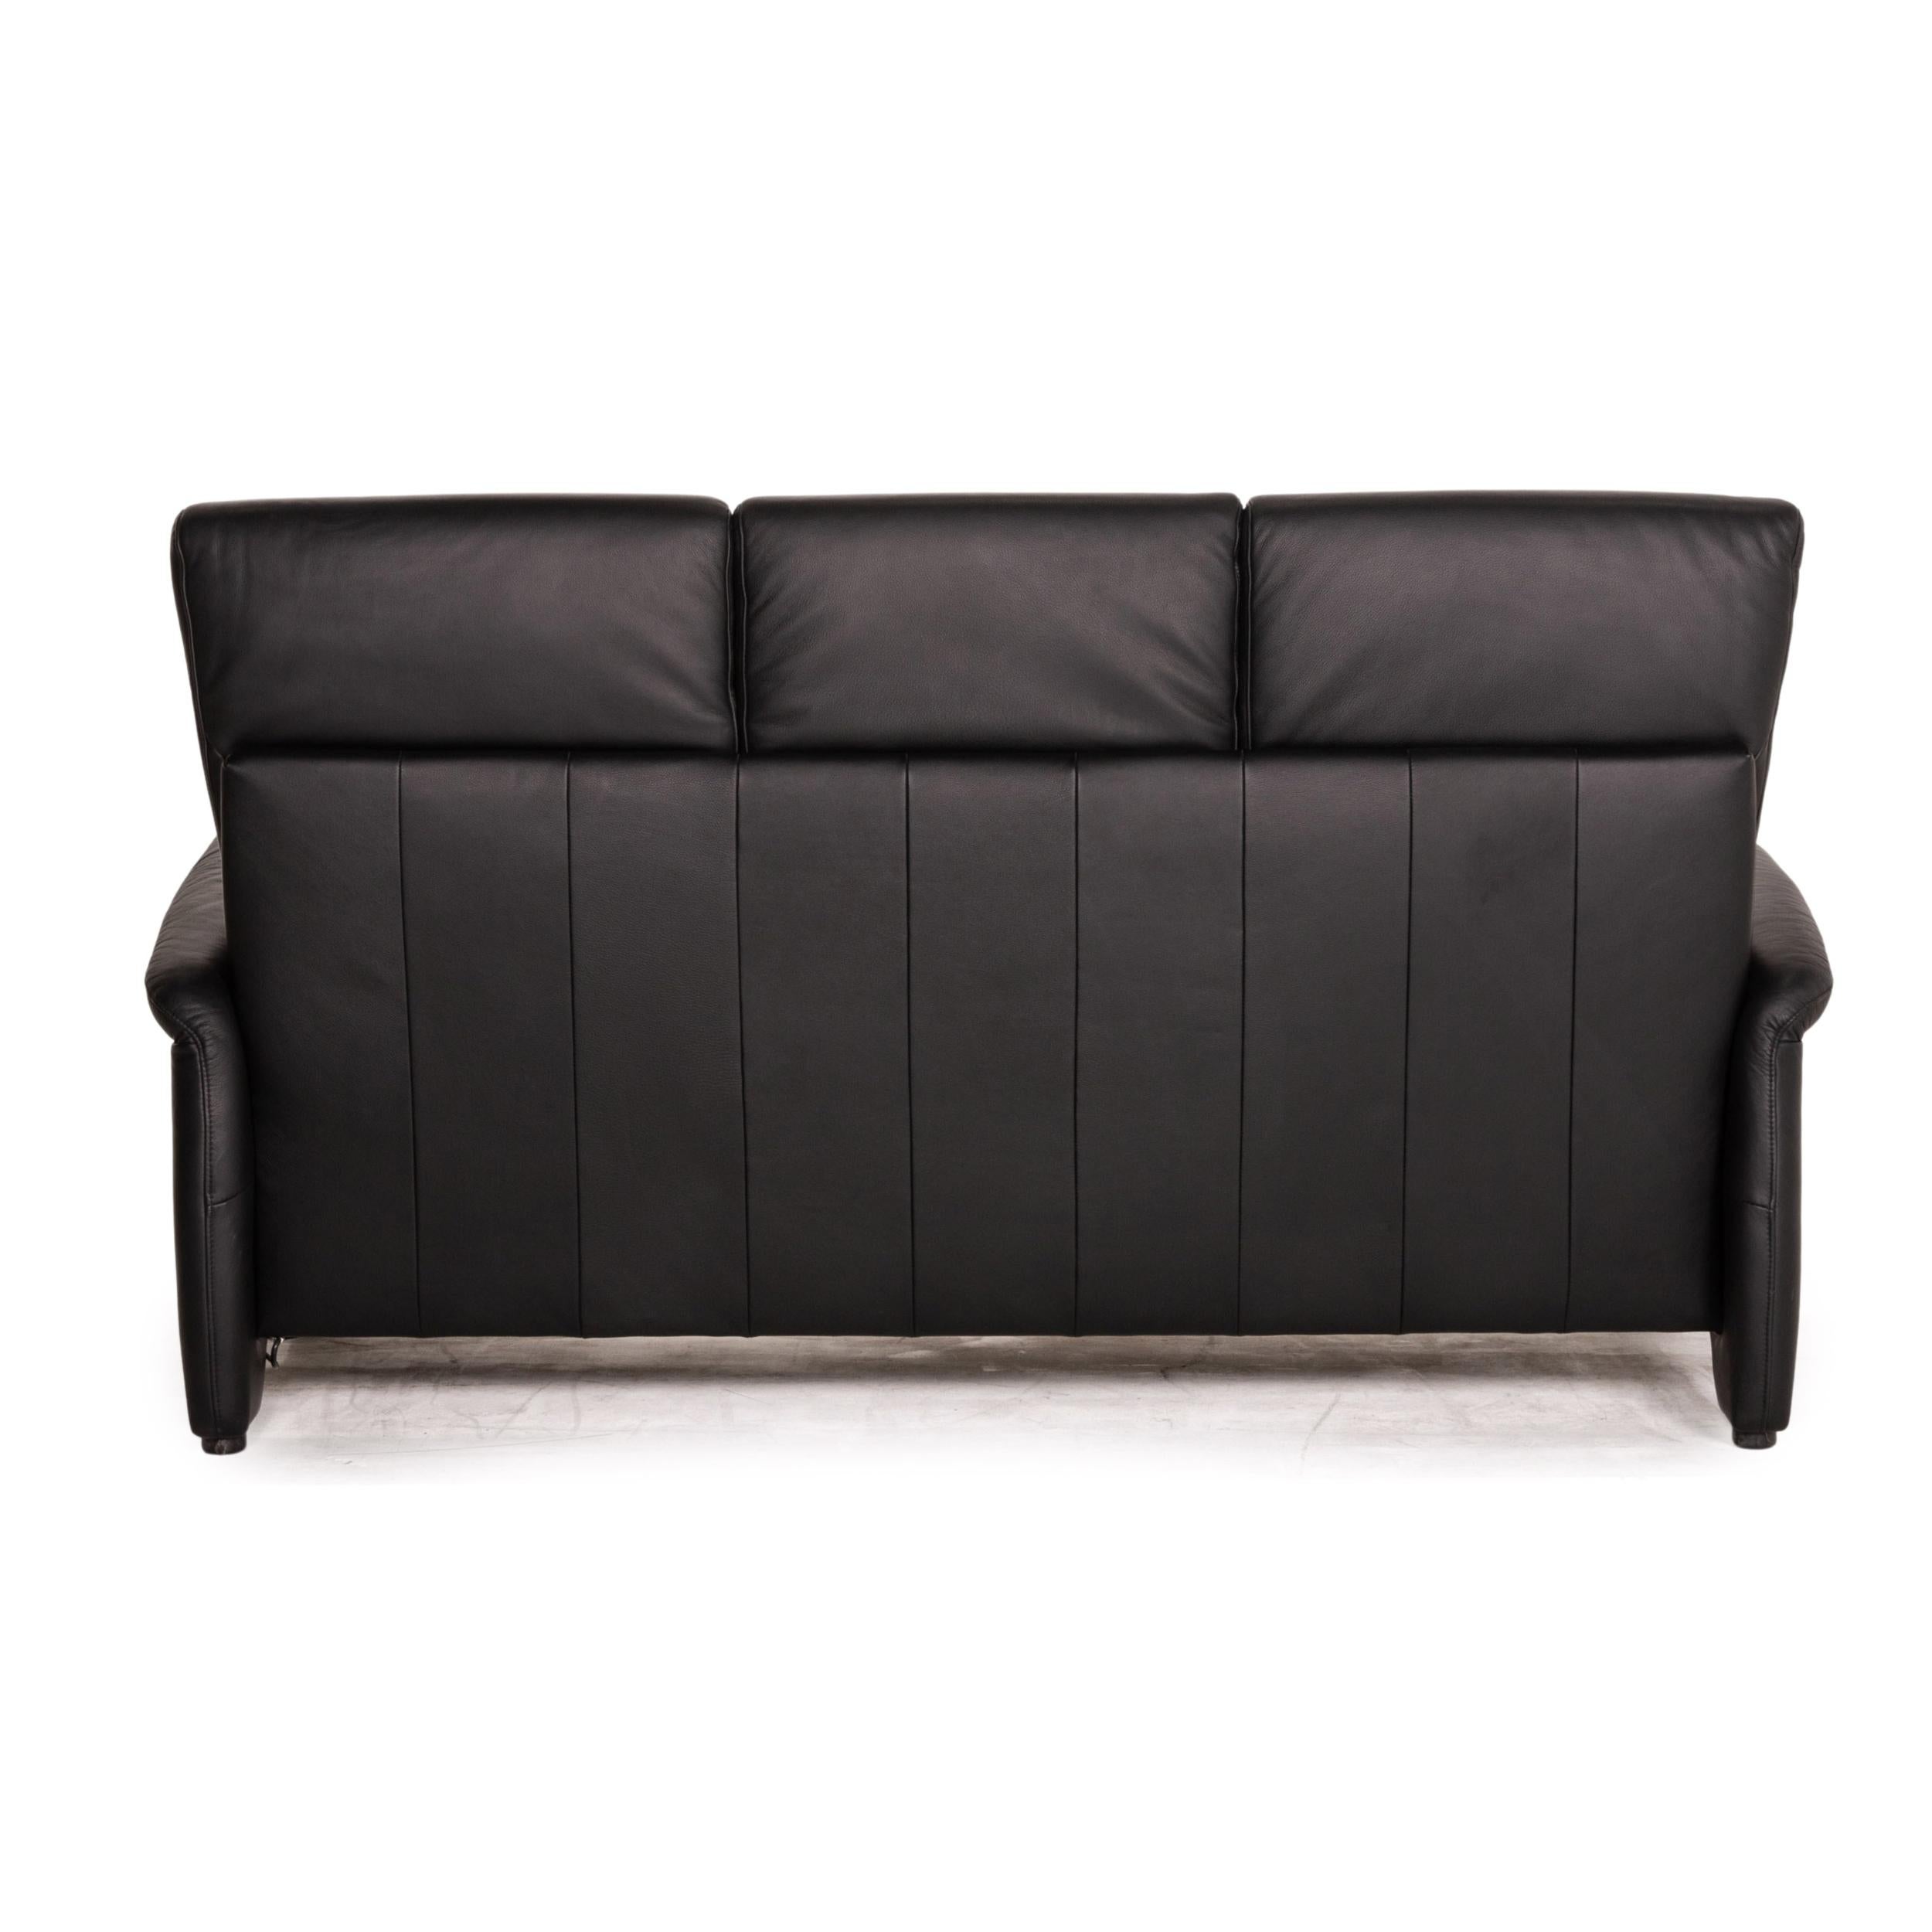 Himolla Ergoline Leather Sofa Black Three Seater Function Couch For Sale 4